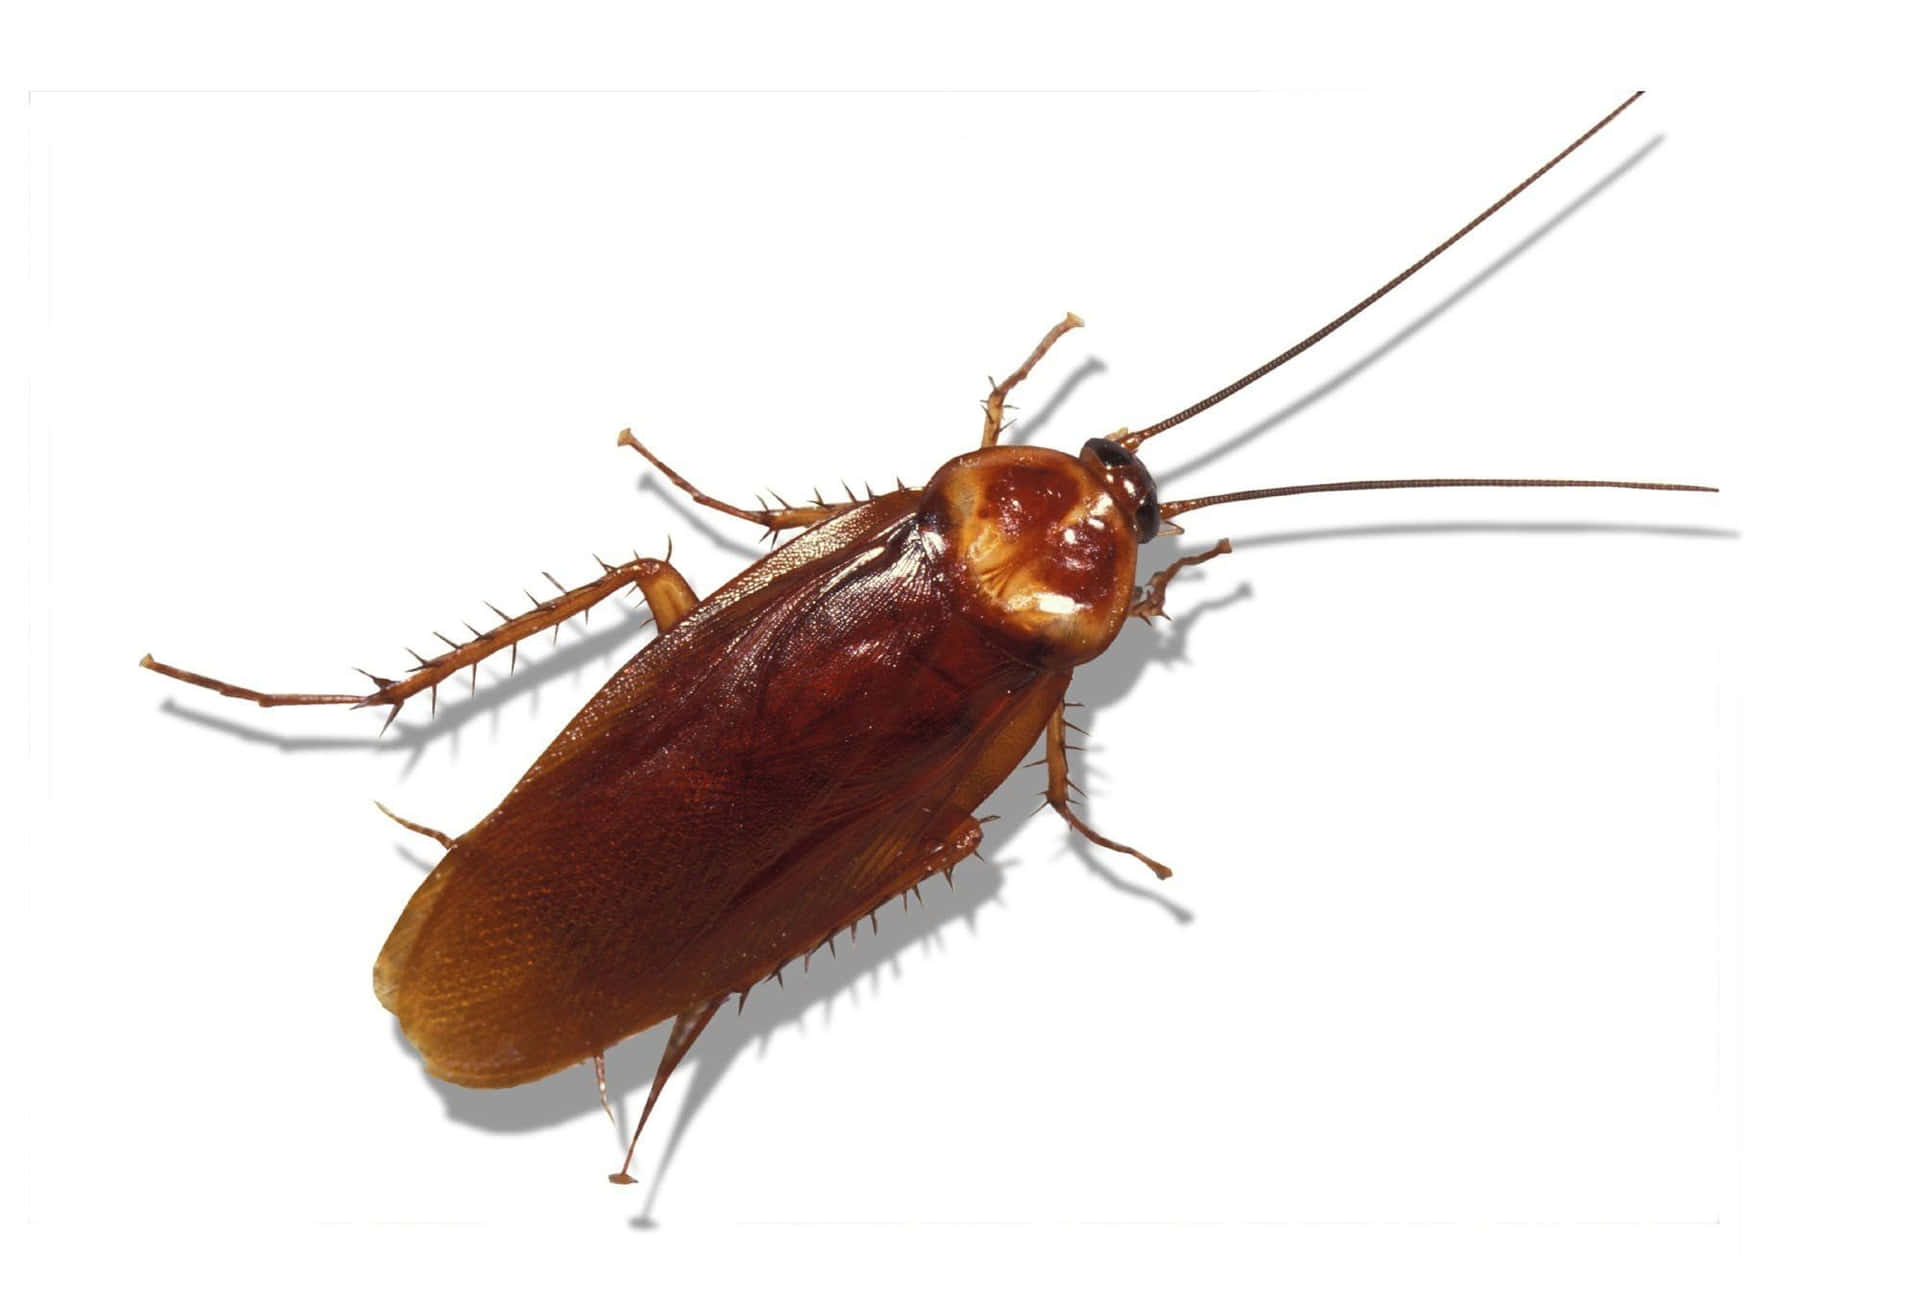 A Brown Cockroach On A White Background